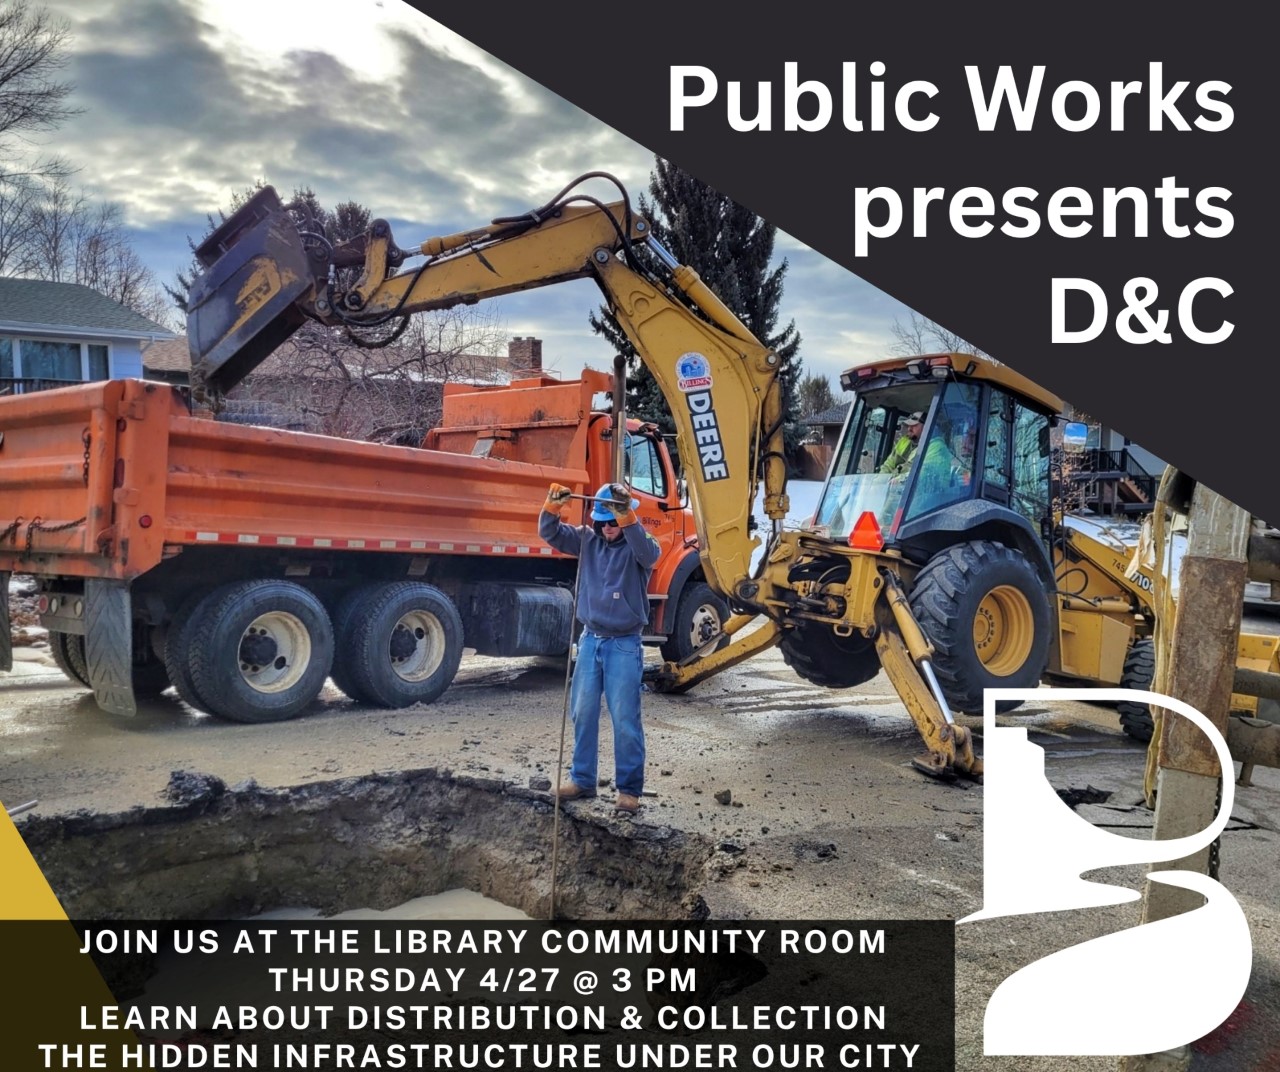 Promotional flyer showing a Public Works employee. The flyer is promoting a presentation about Water Distribution & Wastewater Collection 